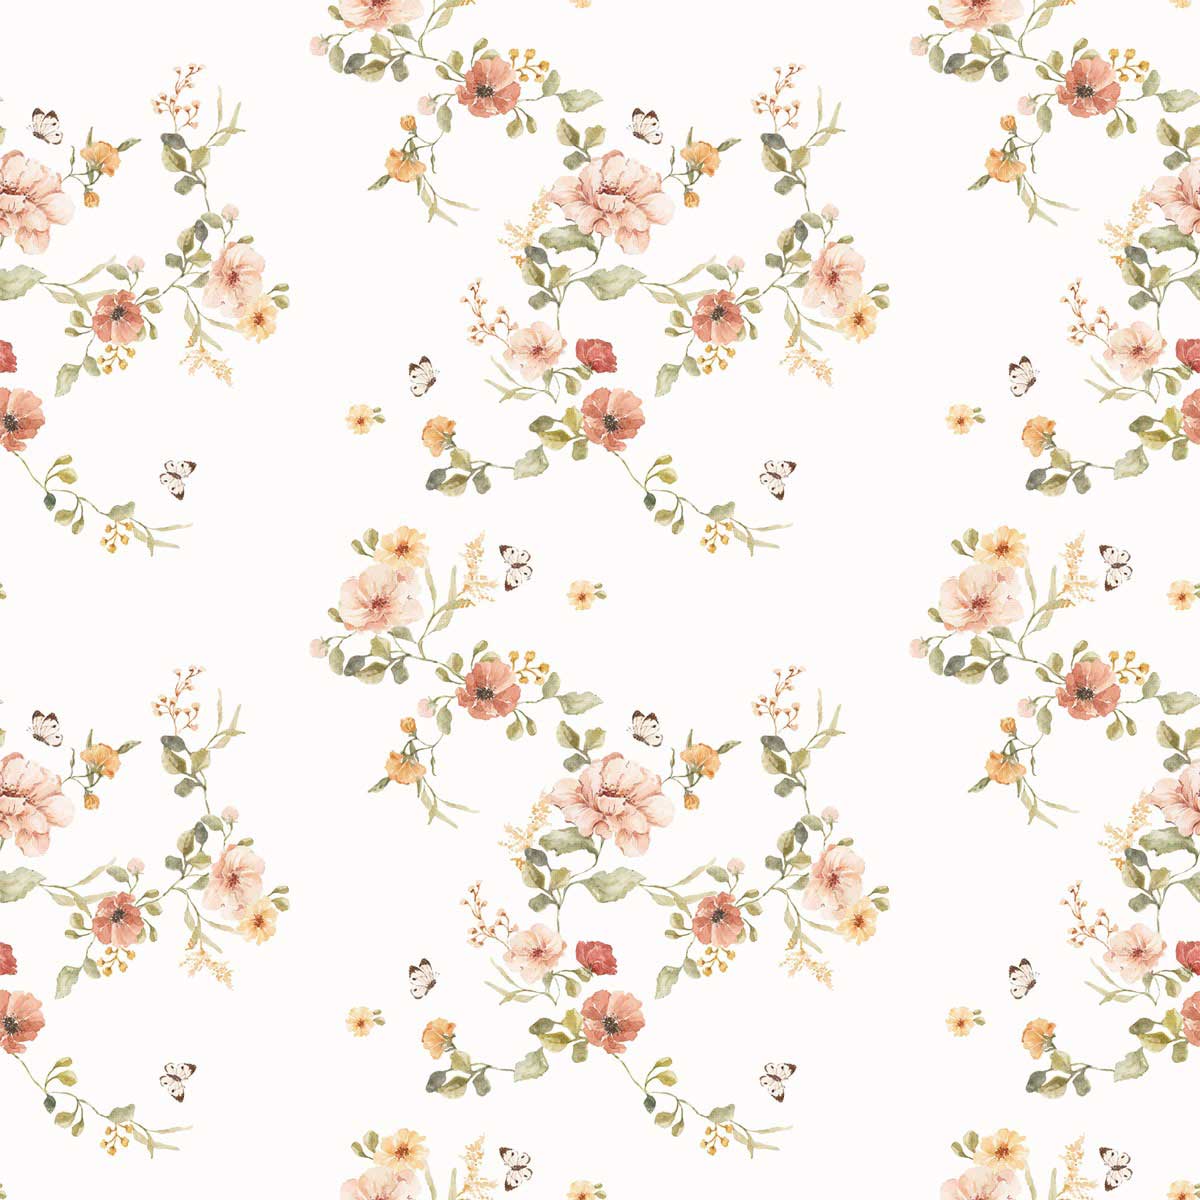 A watercolor floral pattern in pink, peach, and green on a white background - Vintage fall